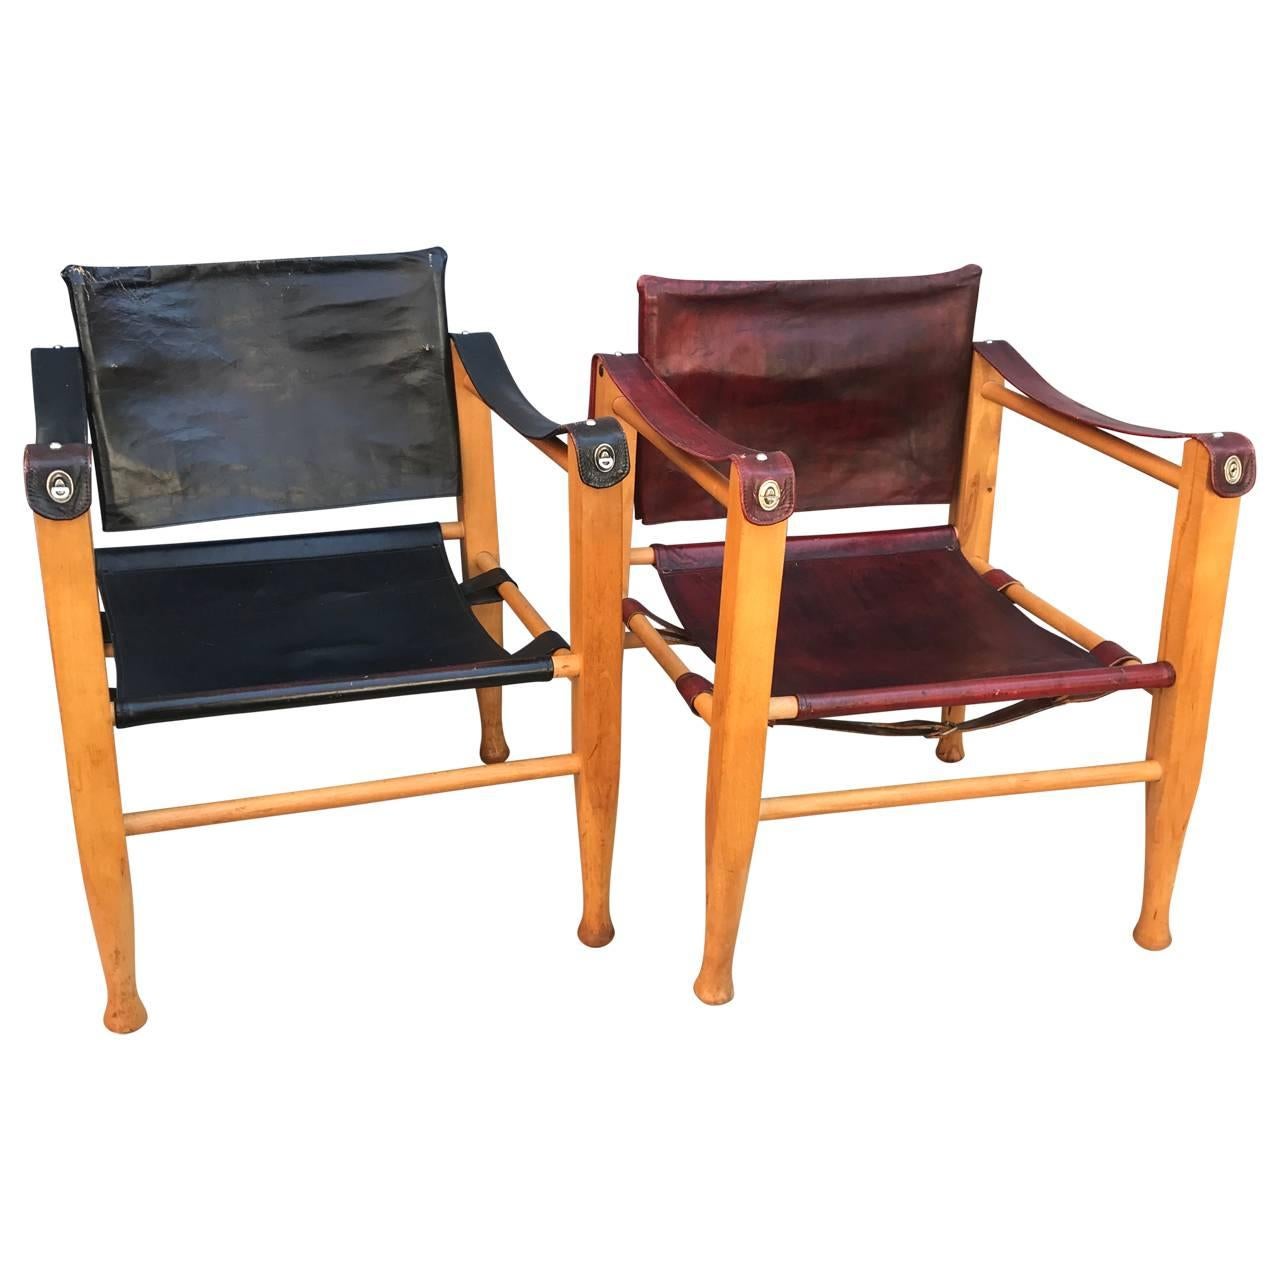 Two vintage Danish Safari chairs, one in thin black leather and one in thin red leather. Both seat has original backing to the leather for strength.

 